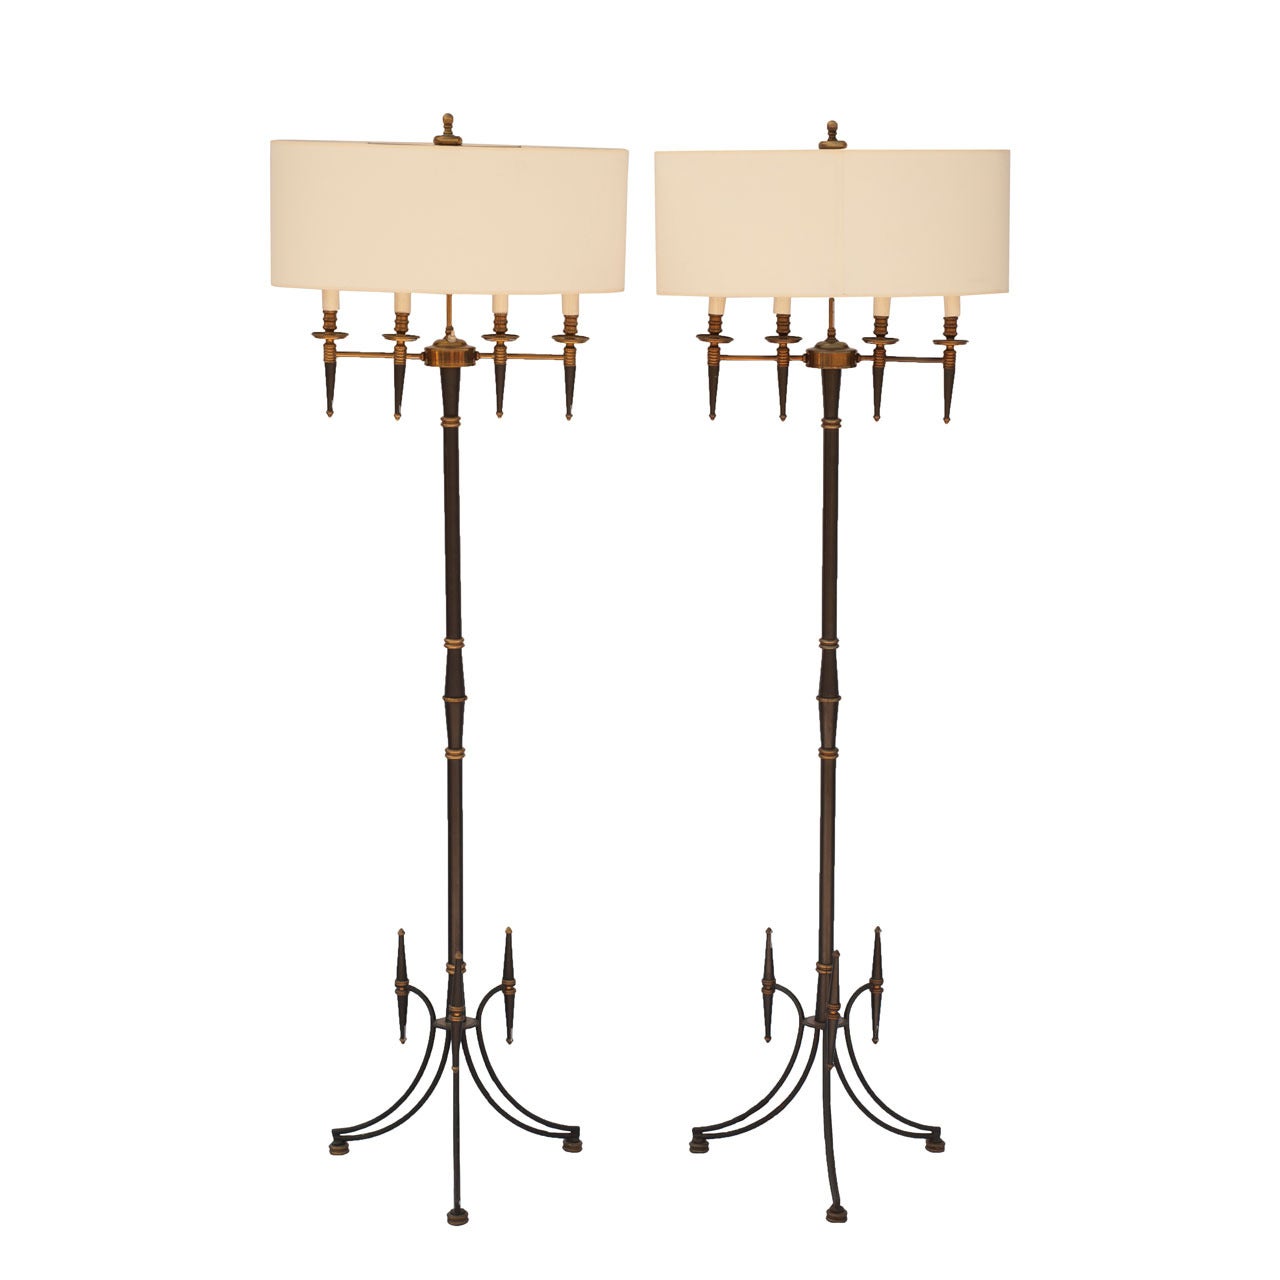 Pair of Standing Floor Lamps In the Style of Mathieu Mategot